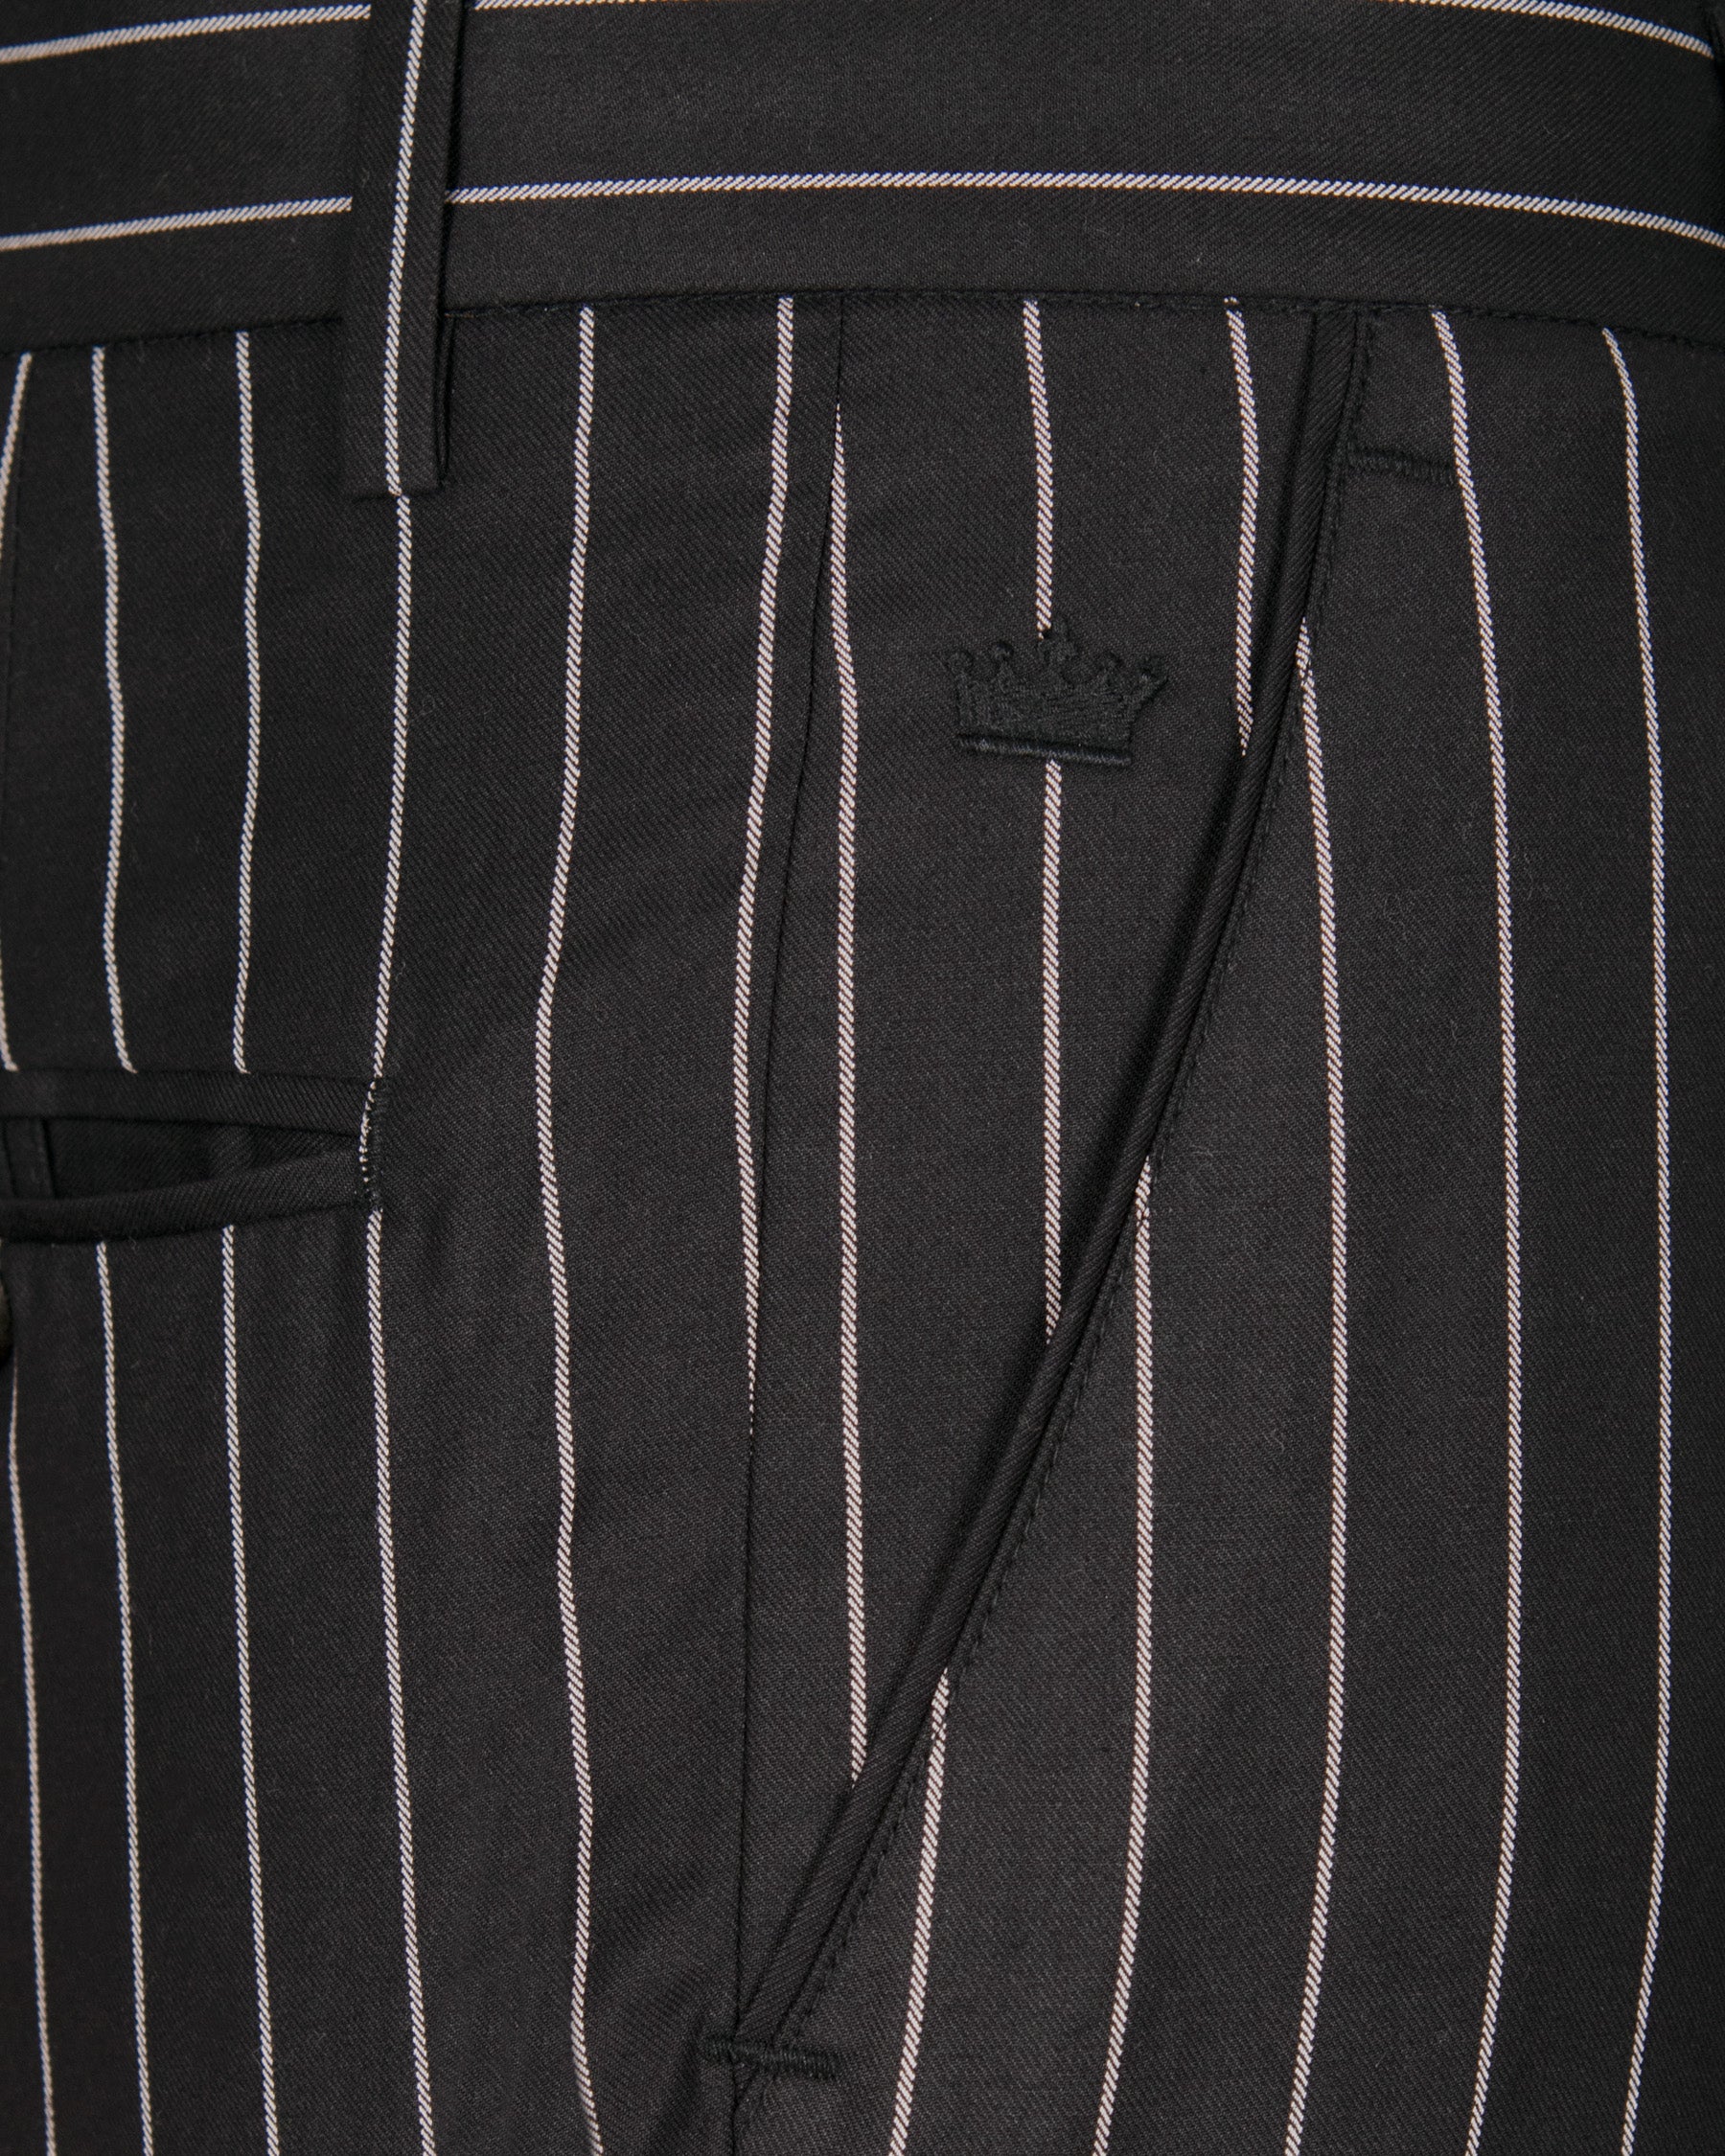 Charcoal Gray with white Striped Woolrich Pant